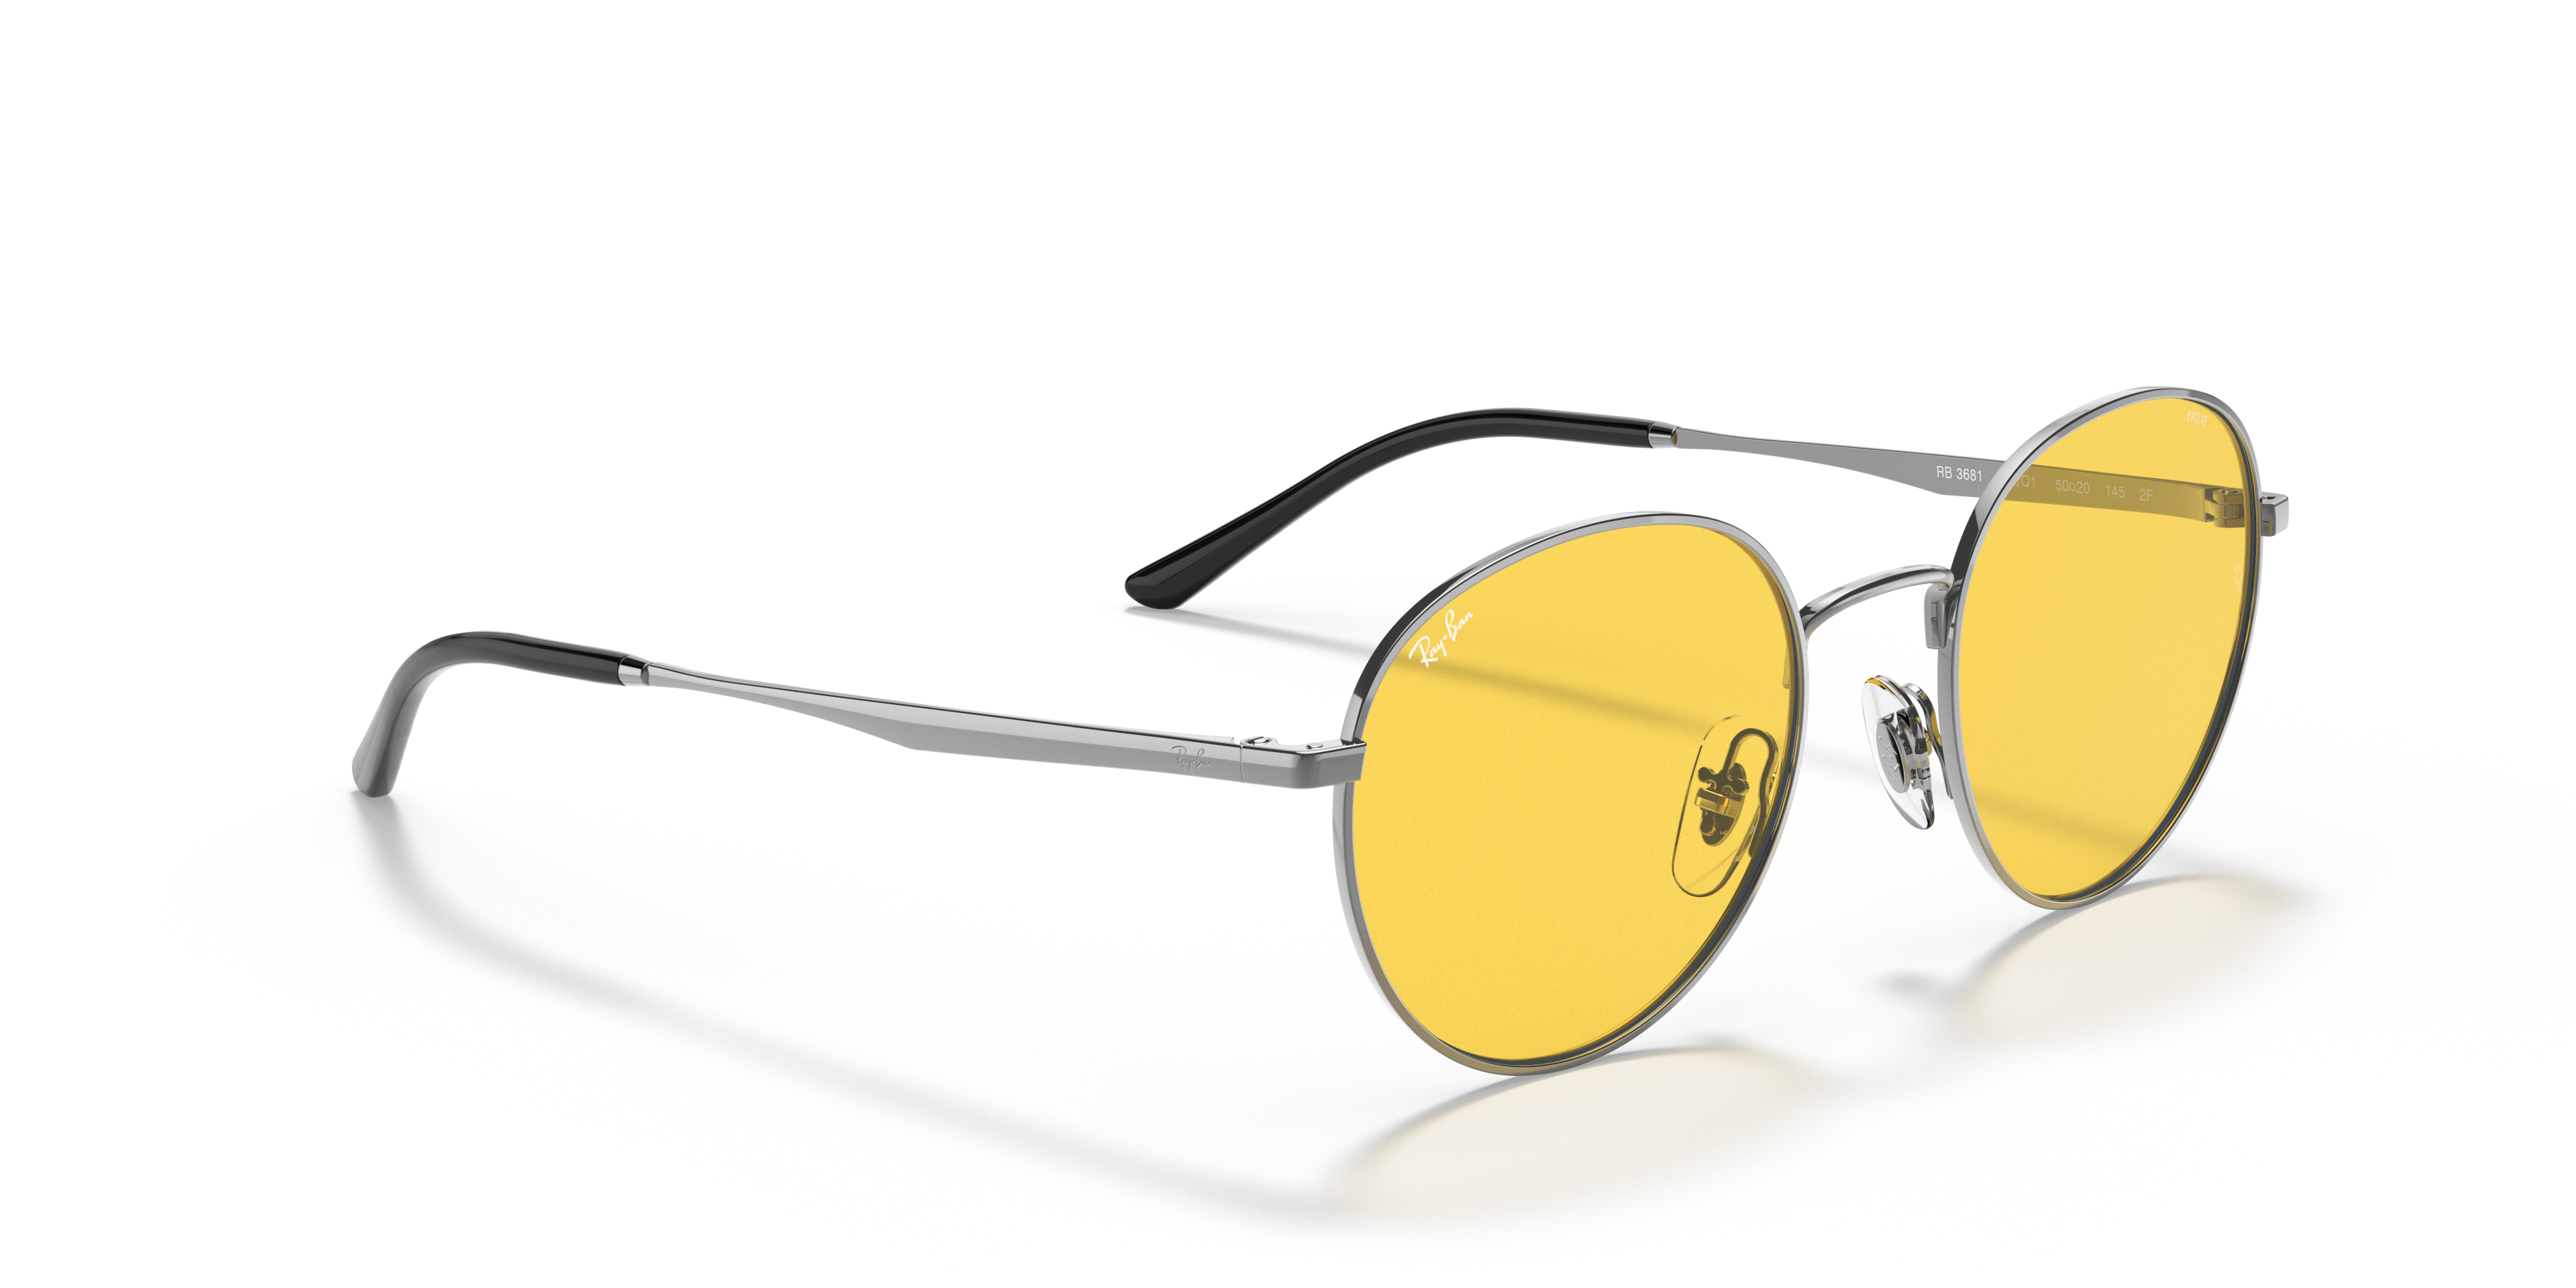 Rb3681 Evolve Sunglasses in Gunmetal and Yellow Photochromic | Ray 